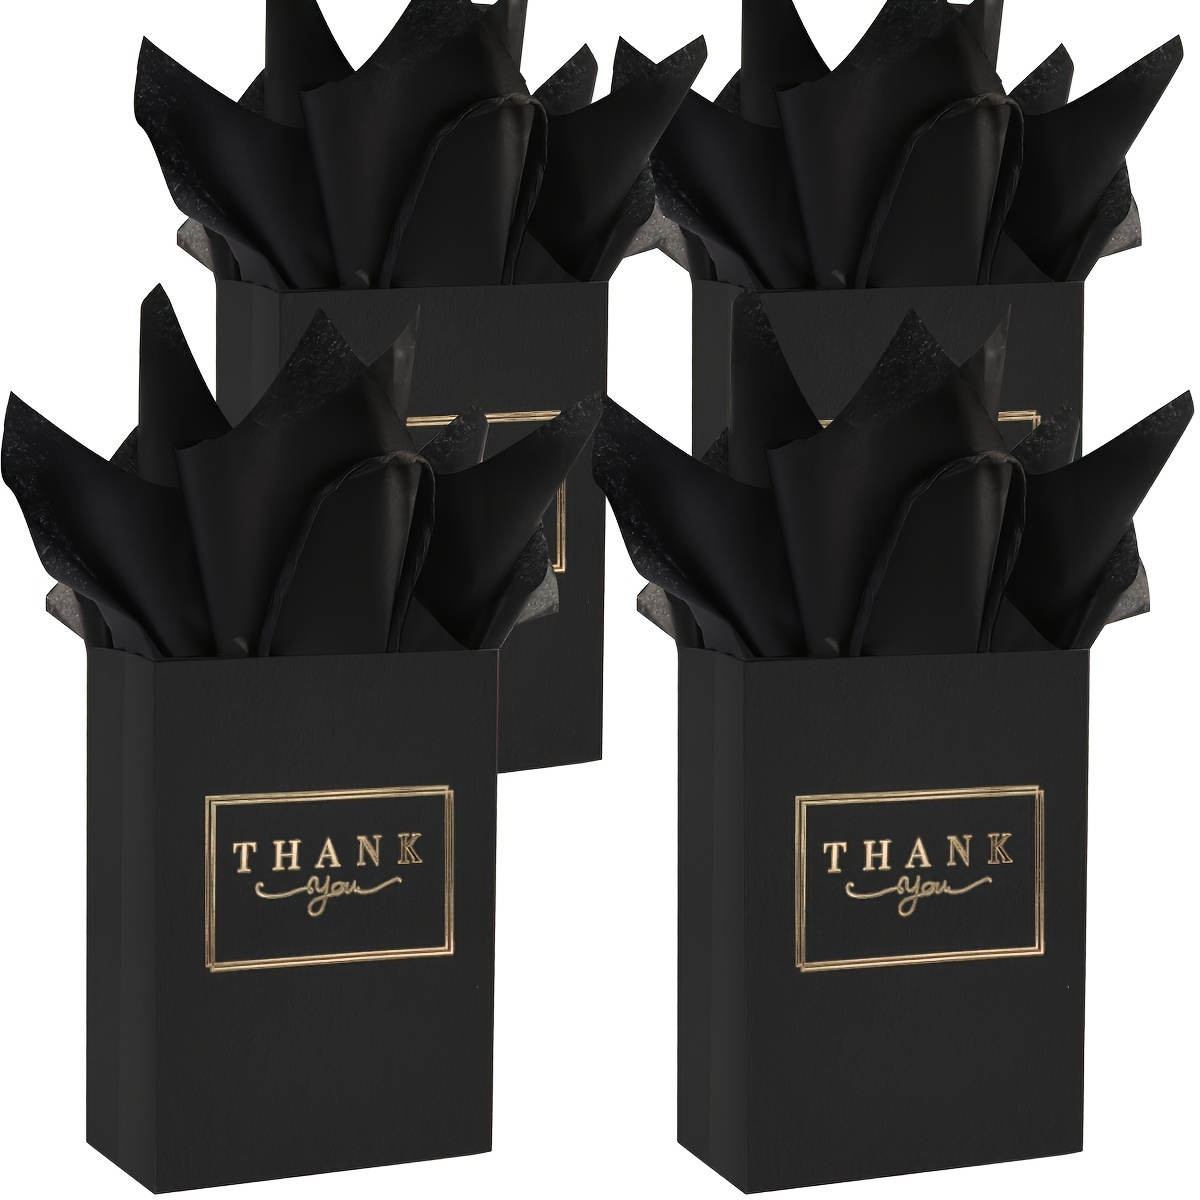 

50-pack Small Thank You Bags With Handles & Tissue Paper - Perfect For Wedding, Baby Shower, Business, Shopping, Party Favors, Birthday, Hotel Guests (black-gold)